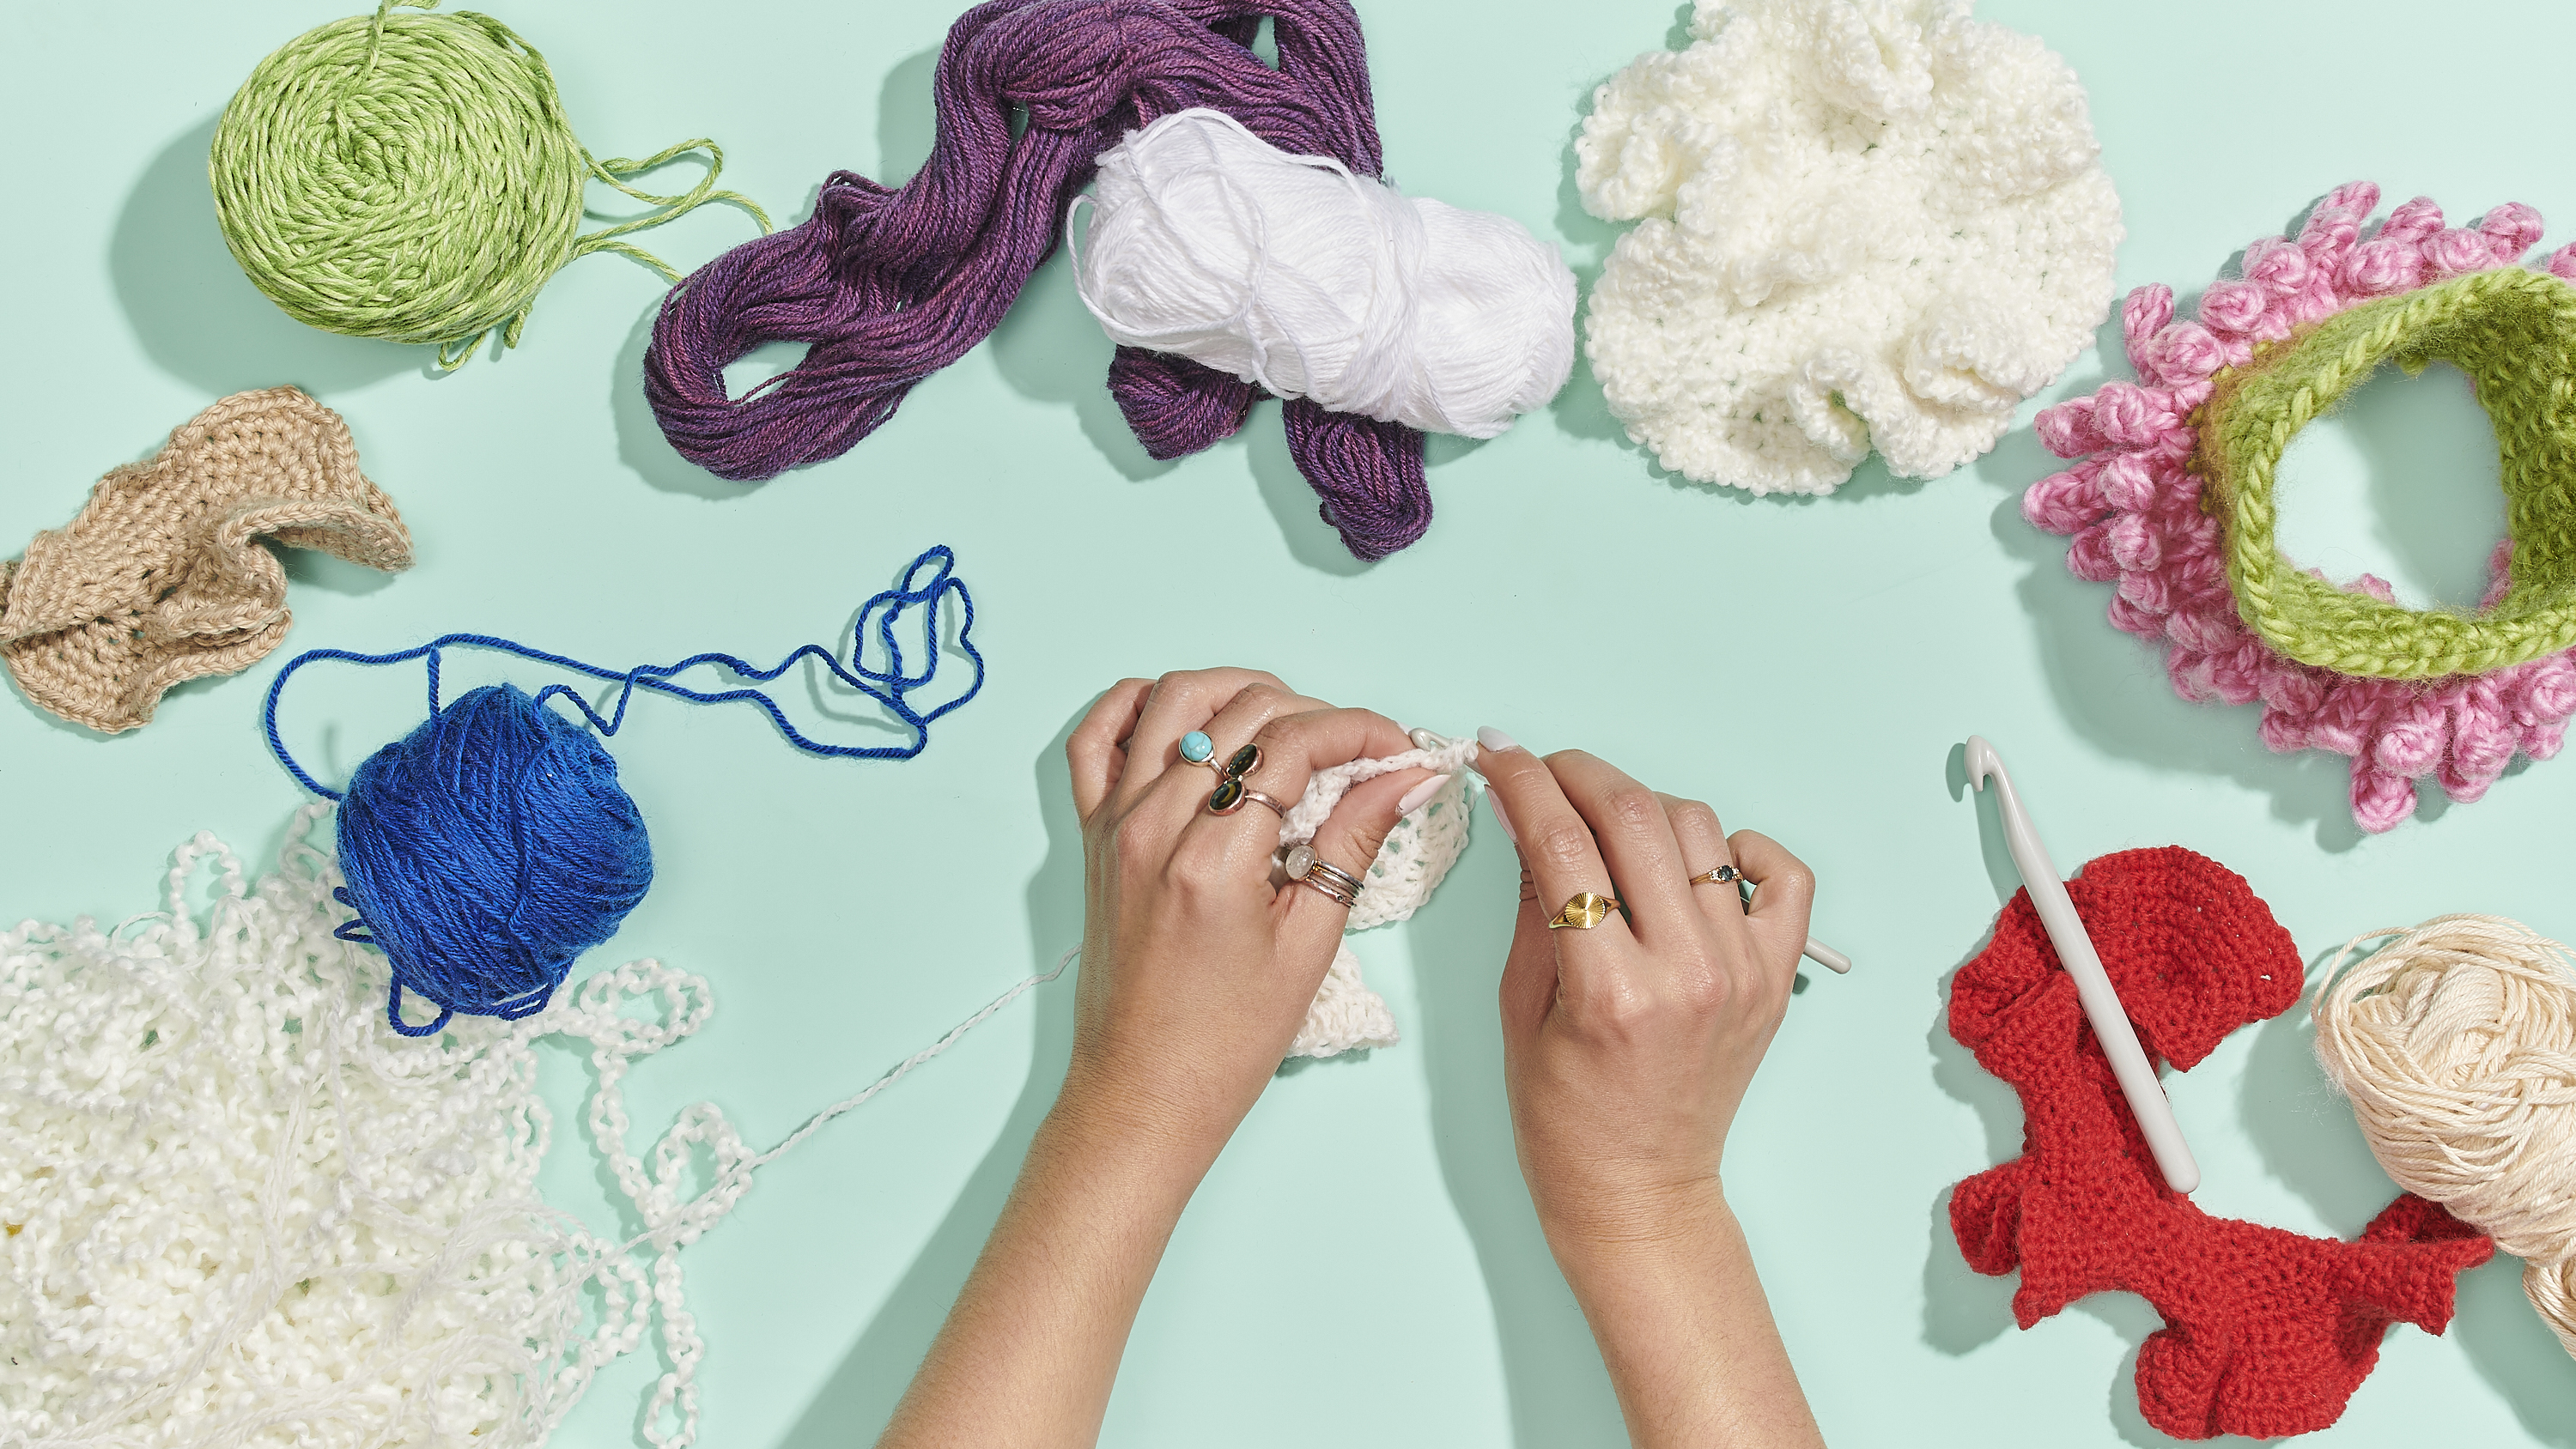 a hand that is crocheting surrounded by yarn against a bright table